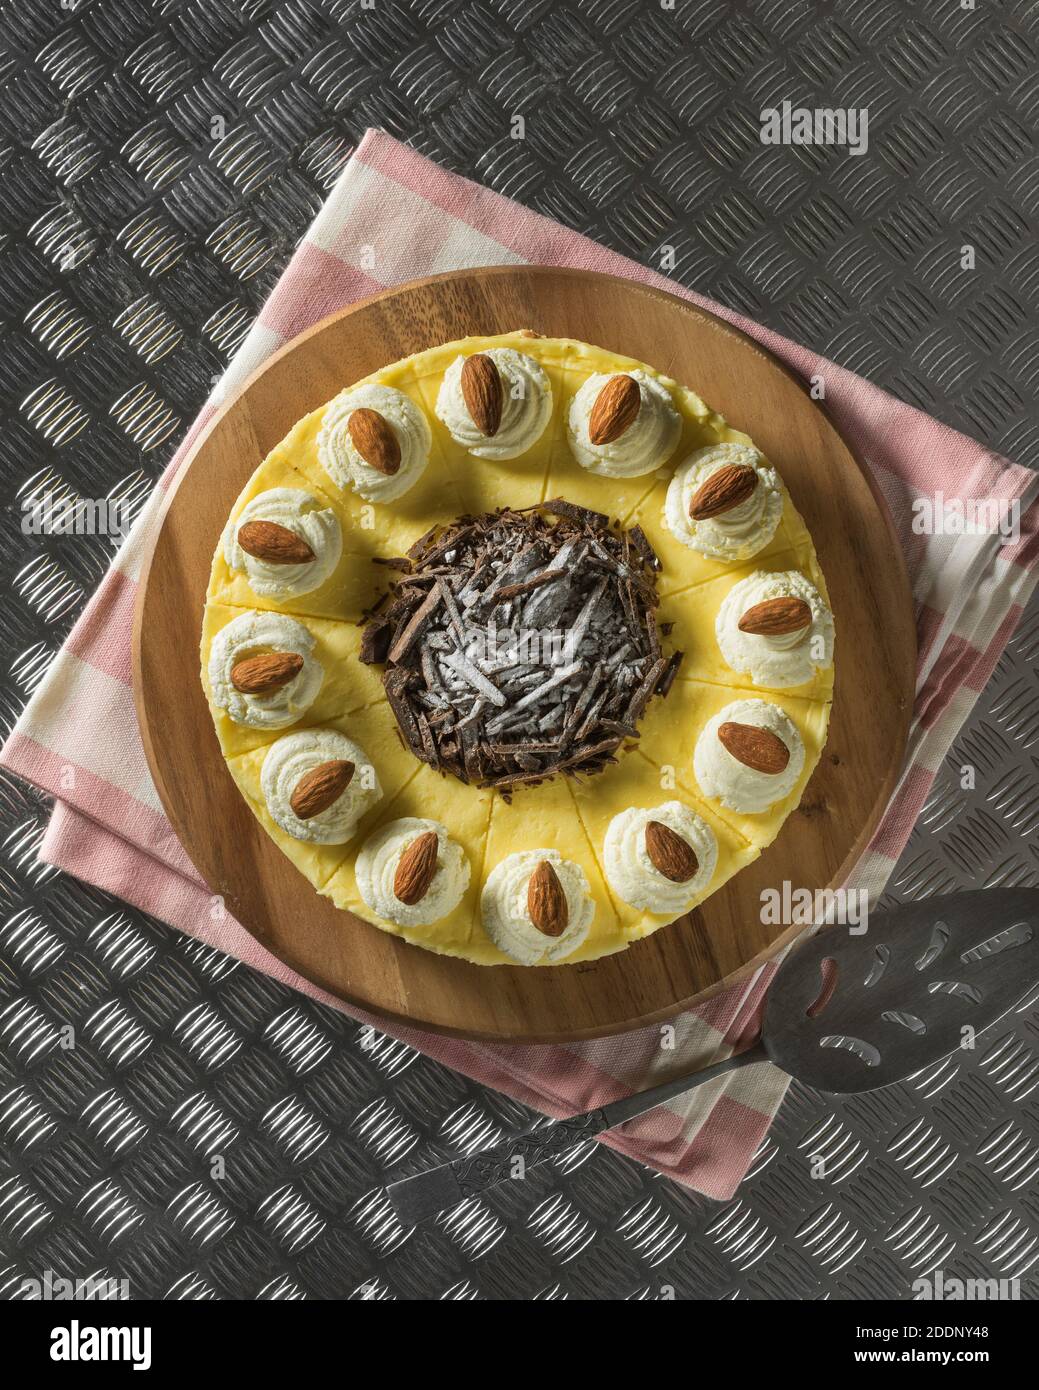 Norway Food Dessert High Resolution Stock Photography And Images Alamy